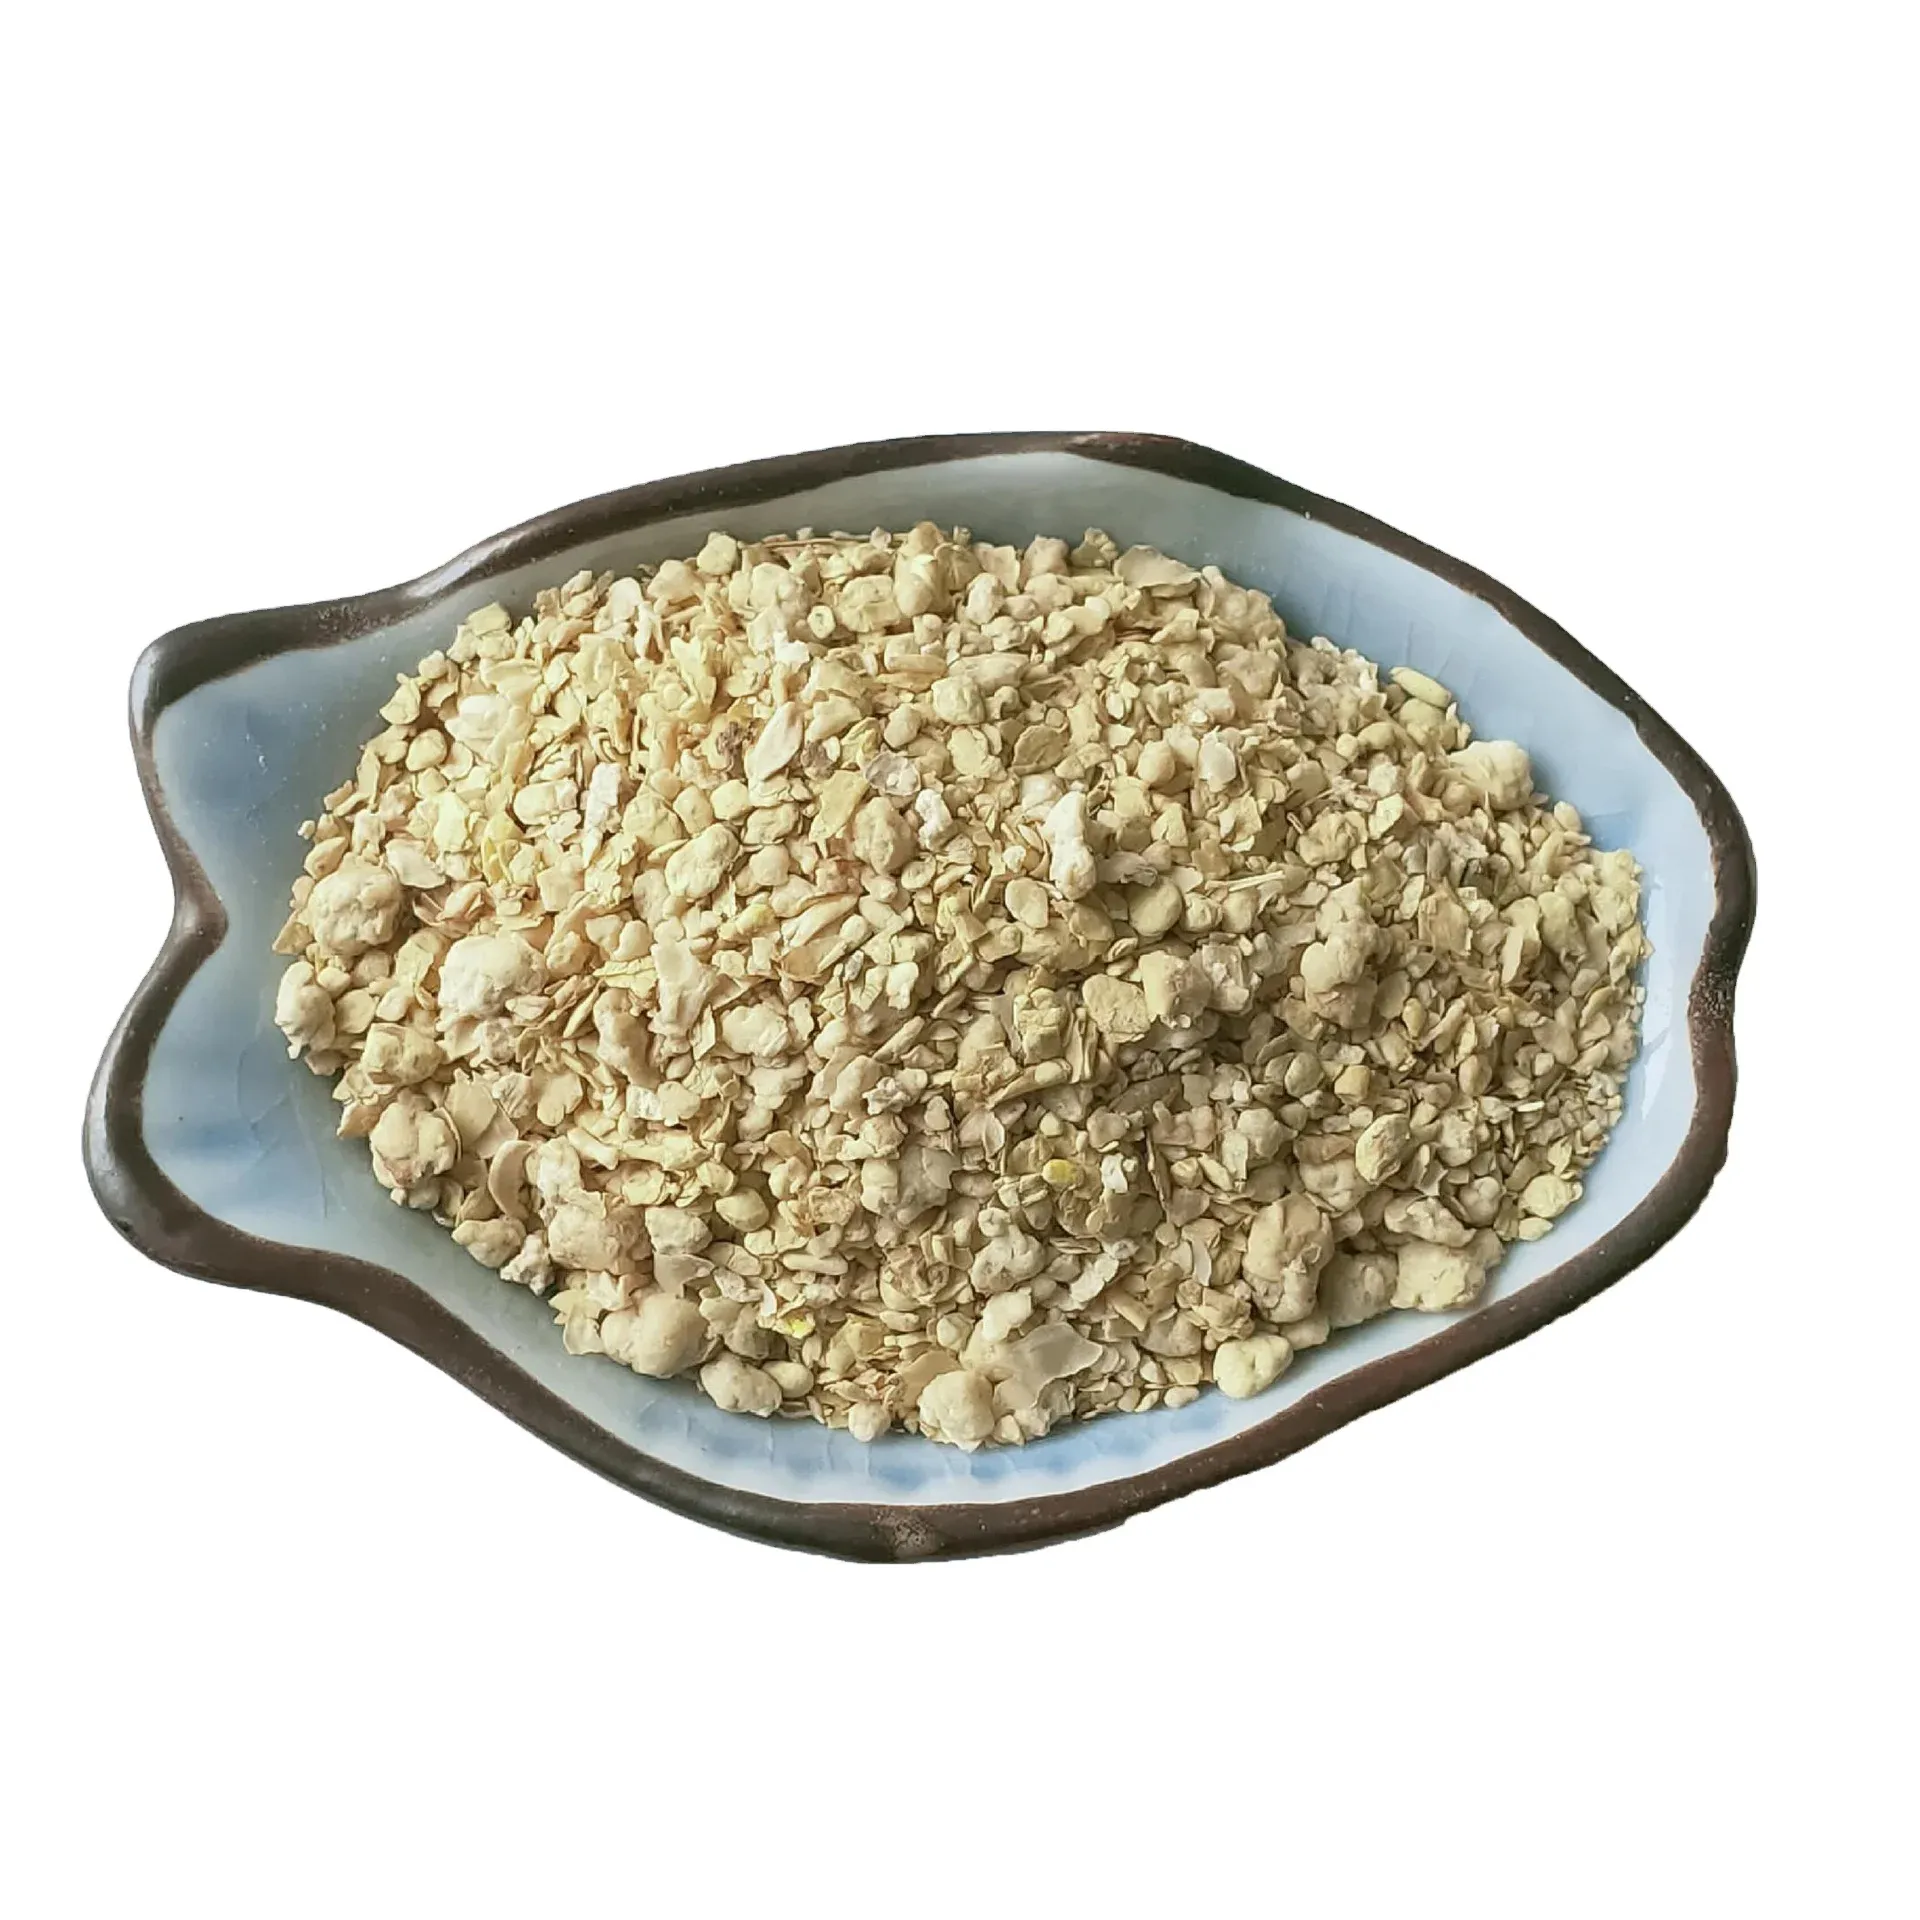 Wholesale prices Premium Animal Feed Soybean Meal and Fish Meal Powder Fish Flour Additive for Poultry Fish and Other Animals